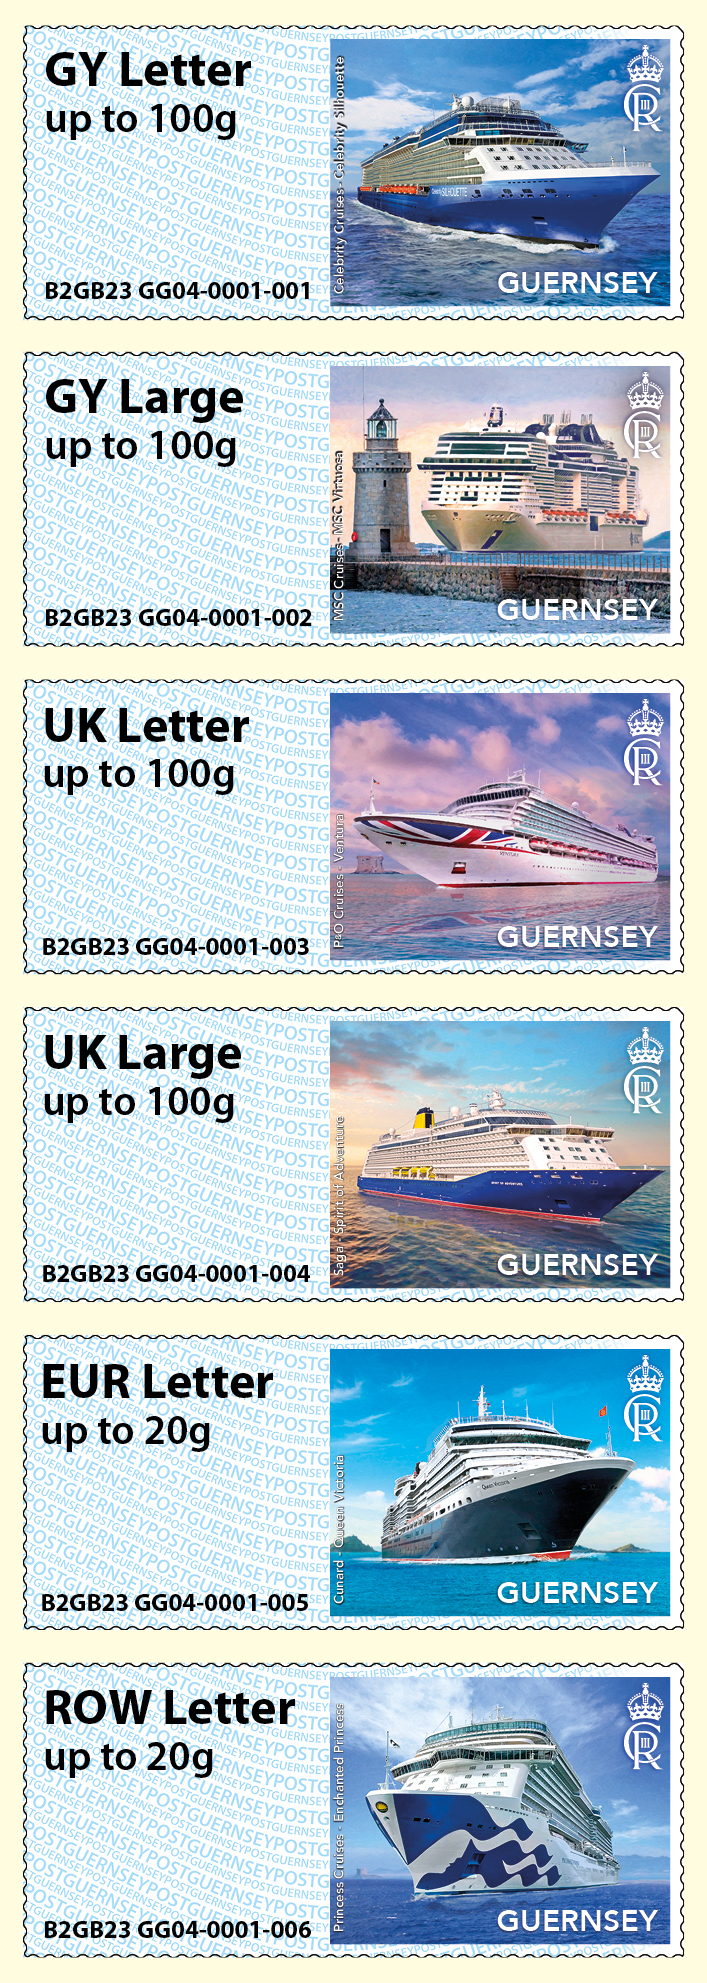 Visiting Cruise Ships depicted on Post and Go stamps